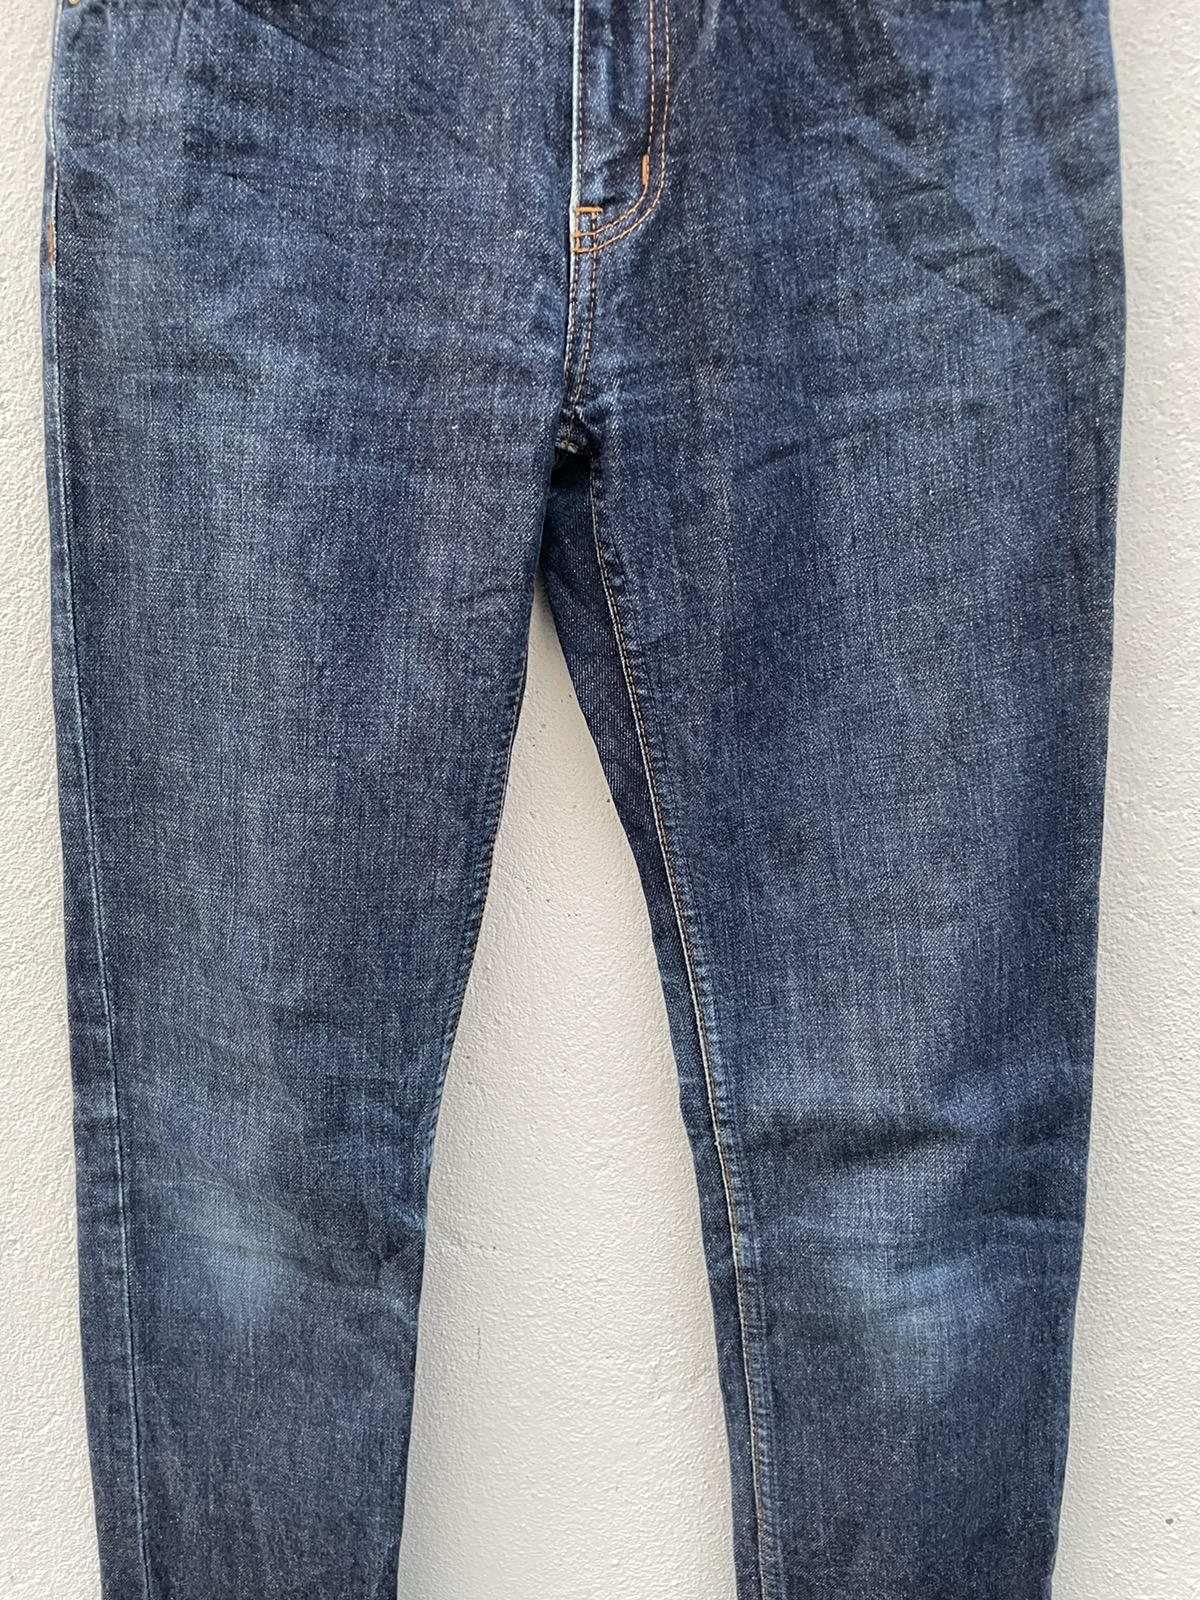 Hysteric Glamour Slim Fit Jeans - 3